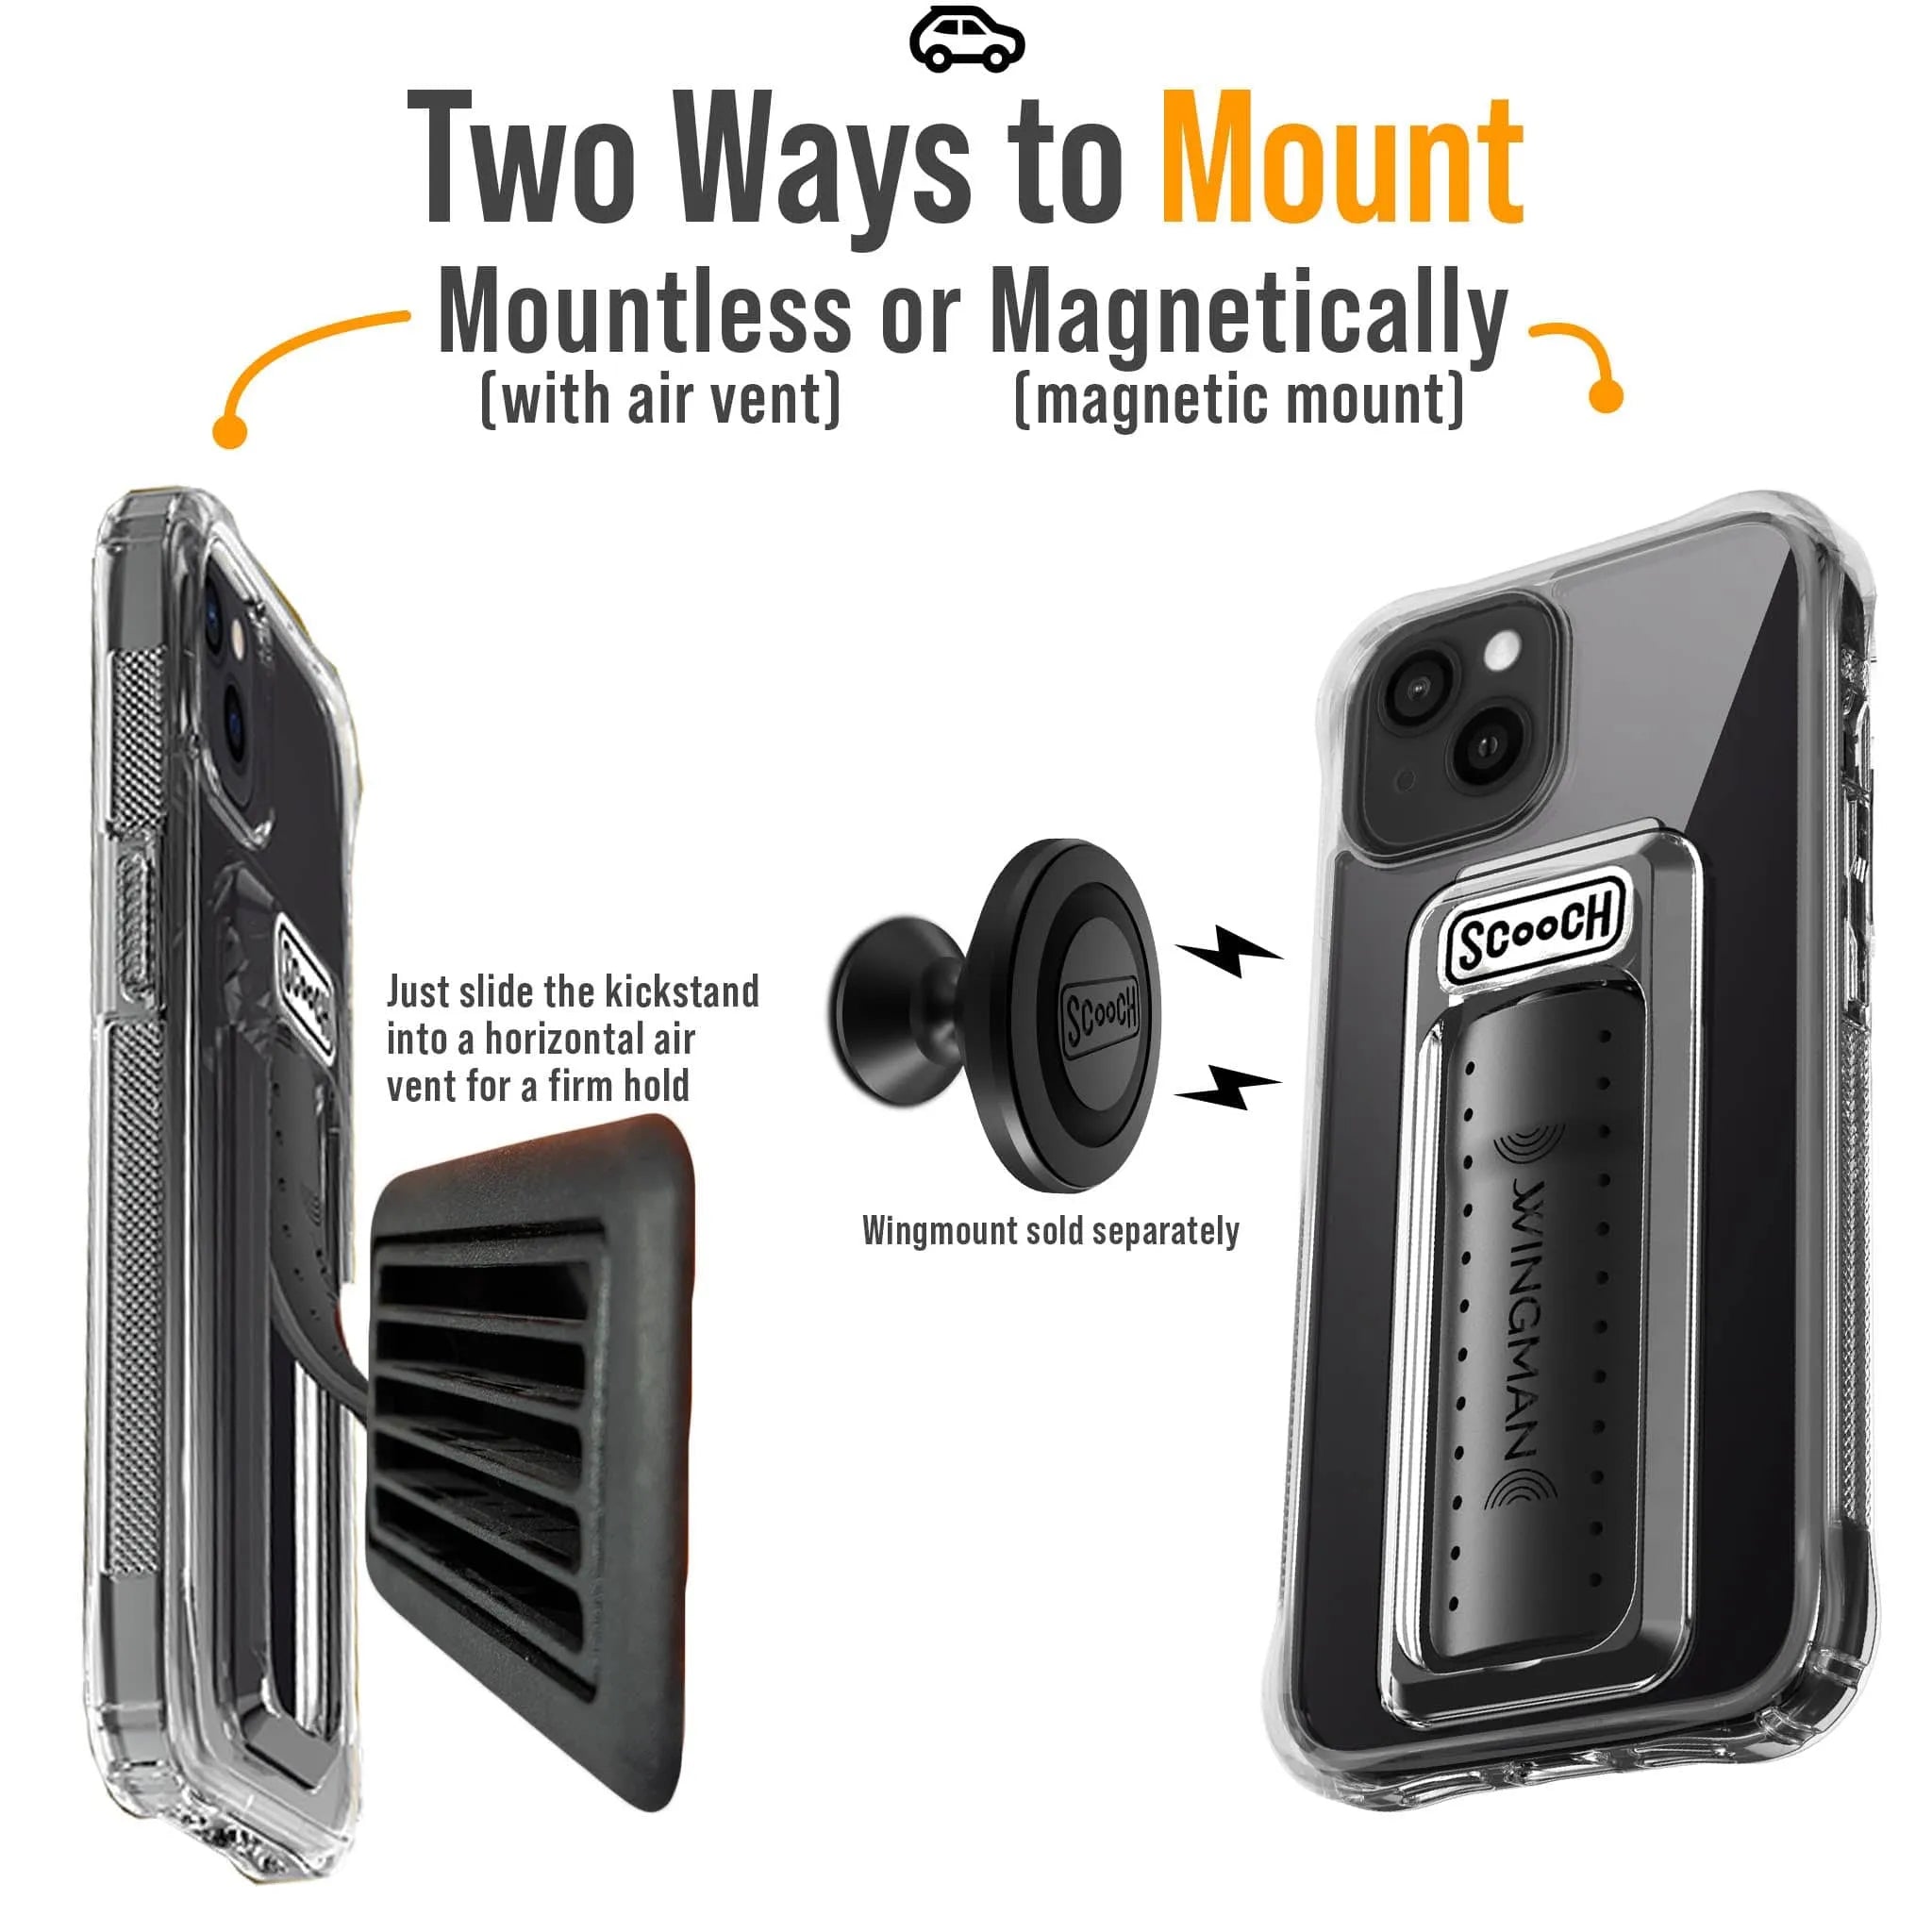 iPhone 13 Mini Case with Kickstand, Phone Grip, and Mount - Wingman